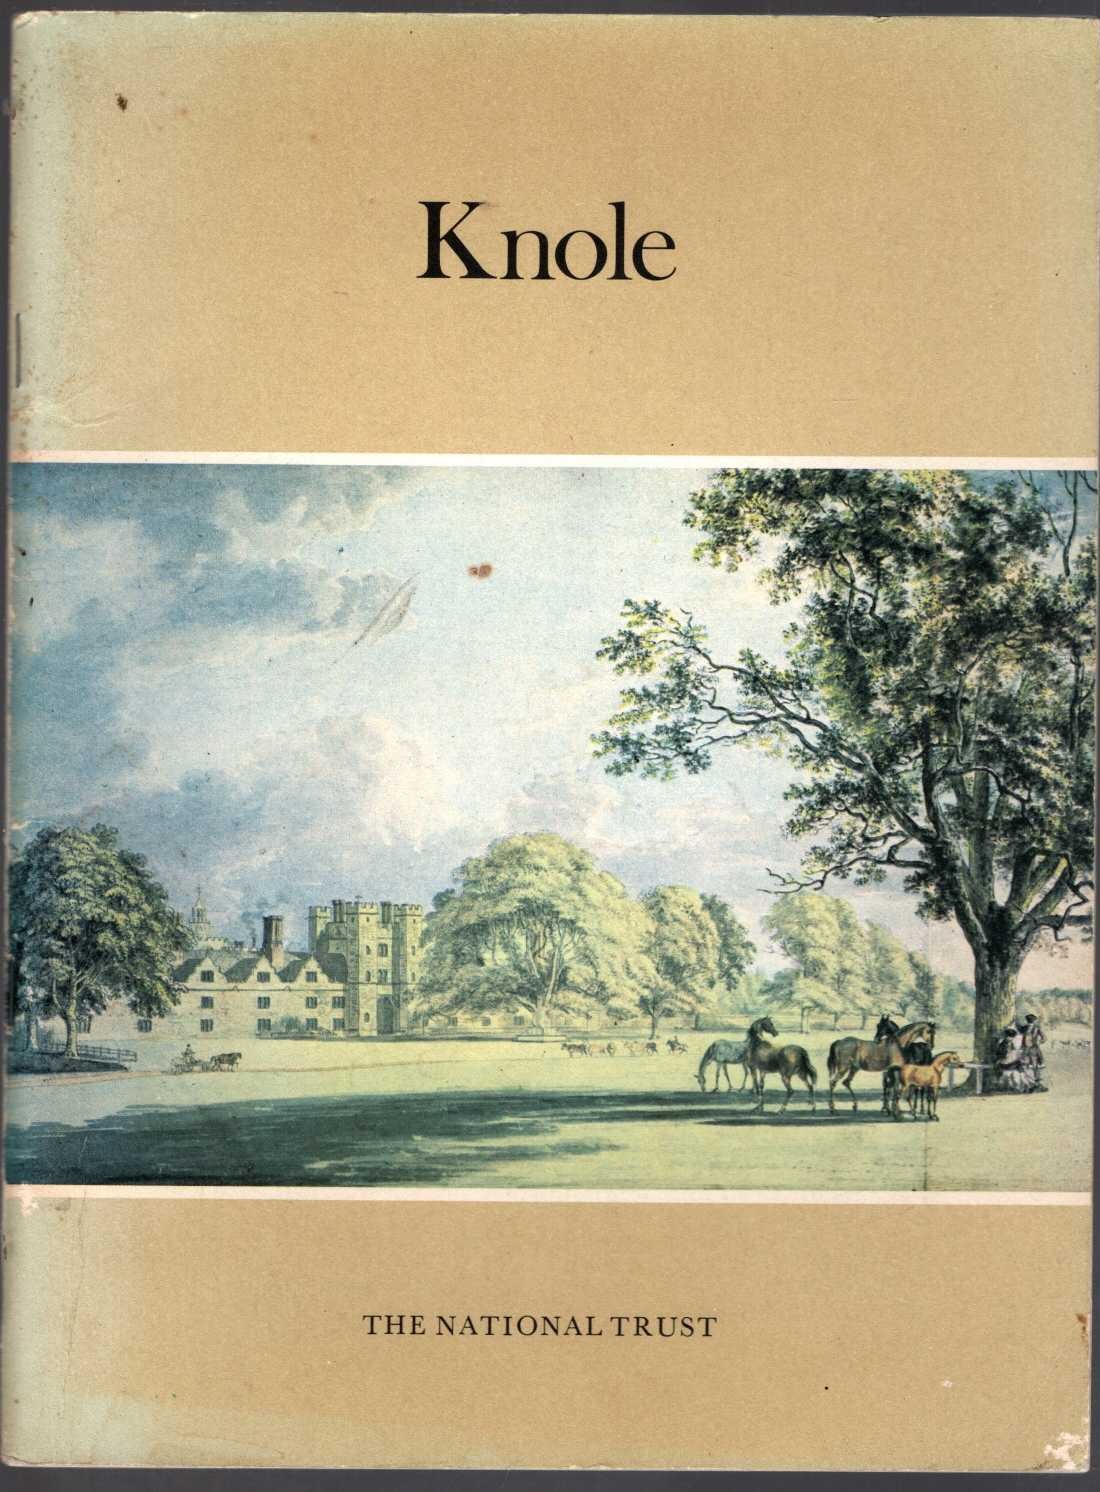 \ KNOLE by The National Trust front book cover image